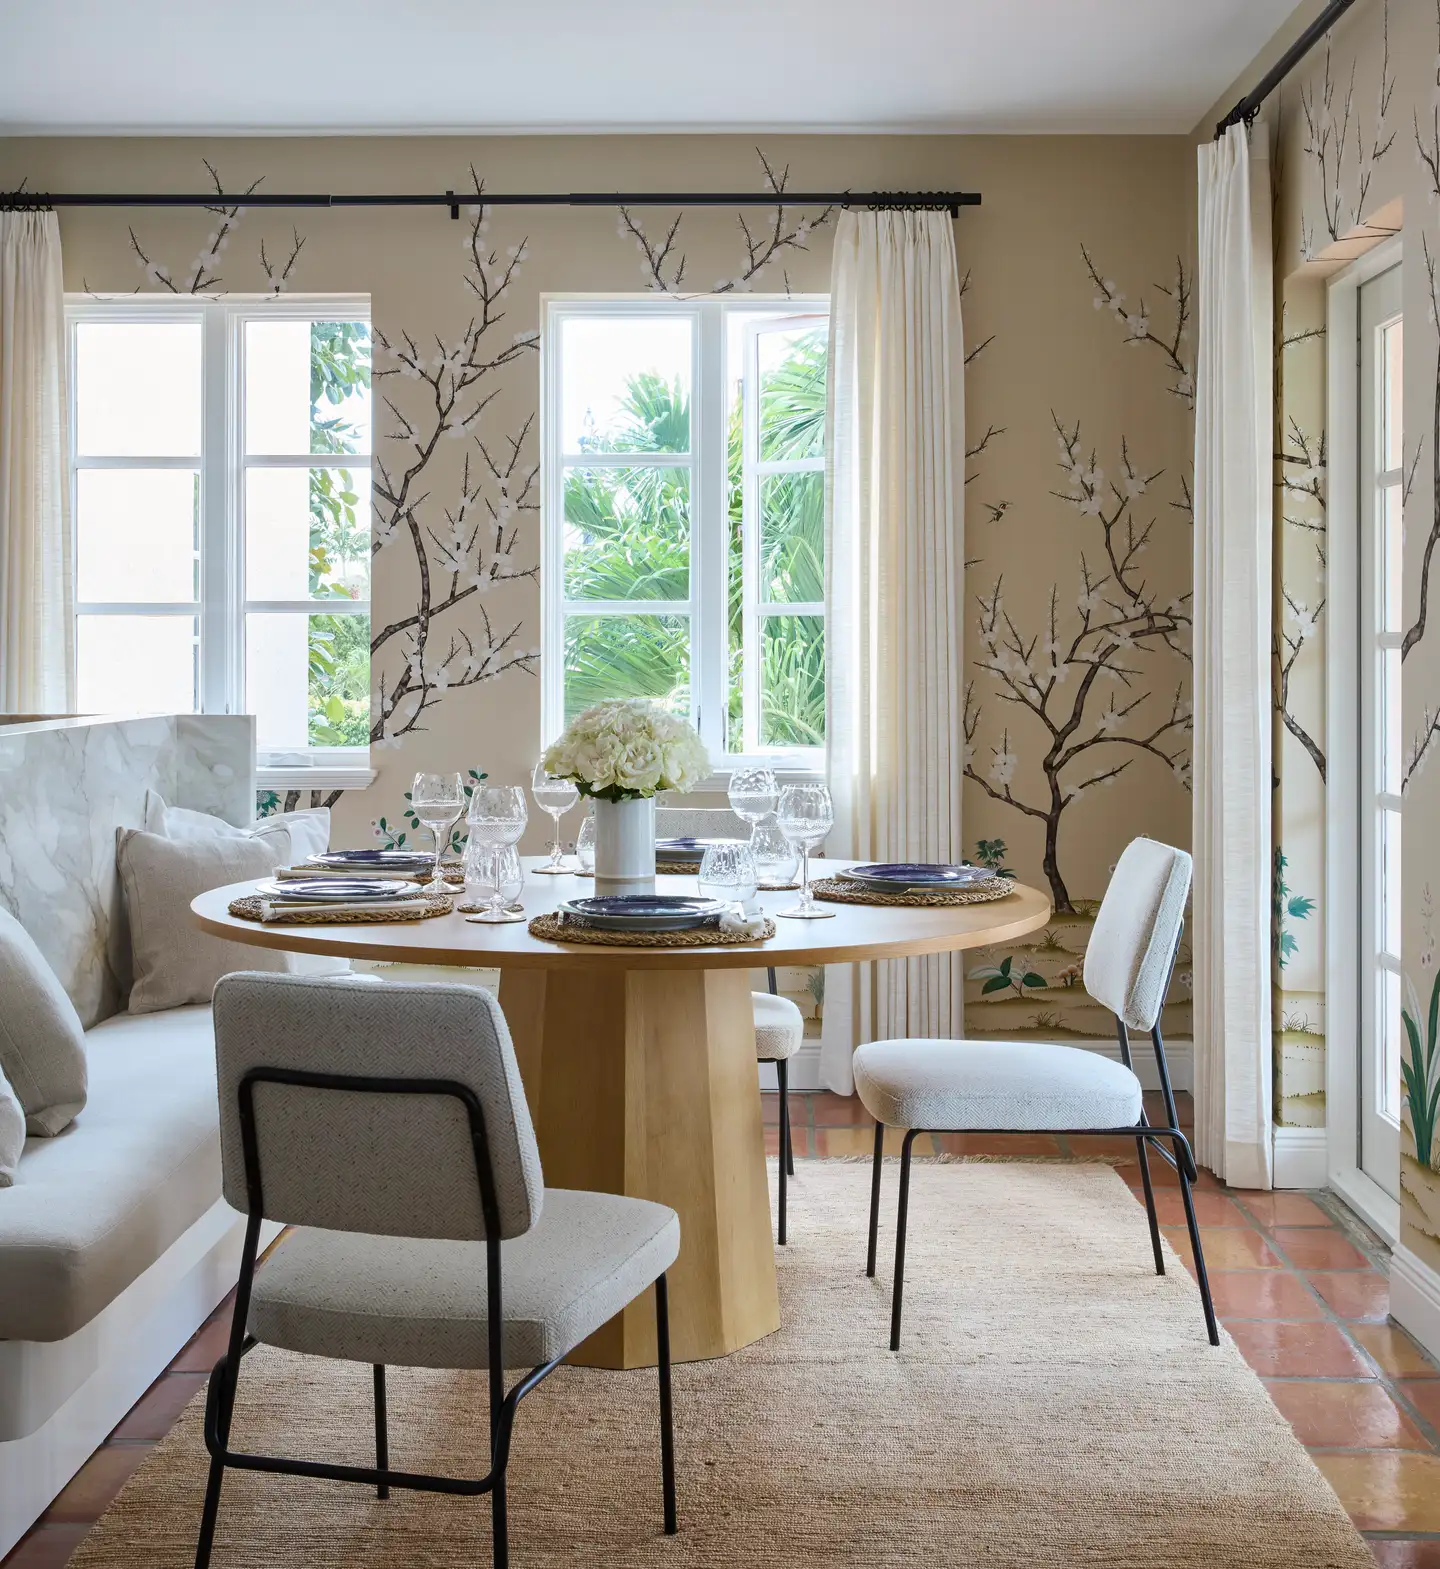 A dining room with a round table and chairs, creating a cozy and inviting atmosphere for meals.